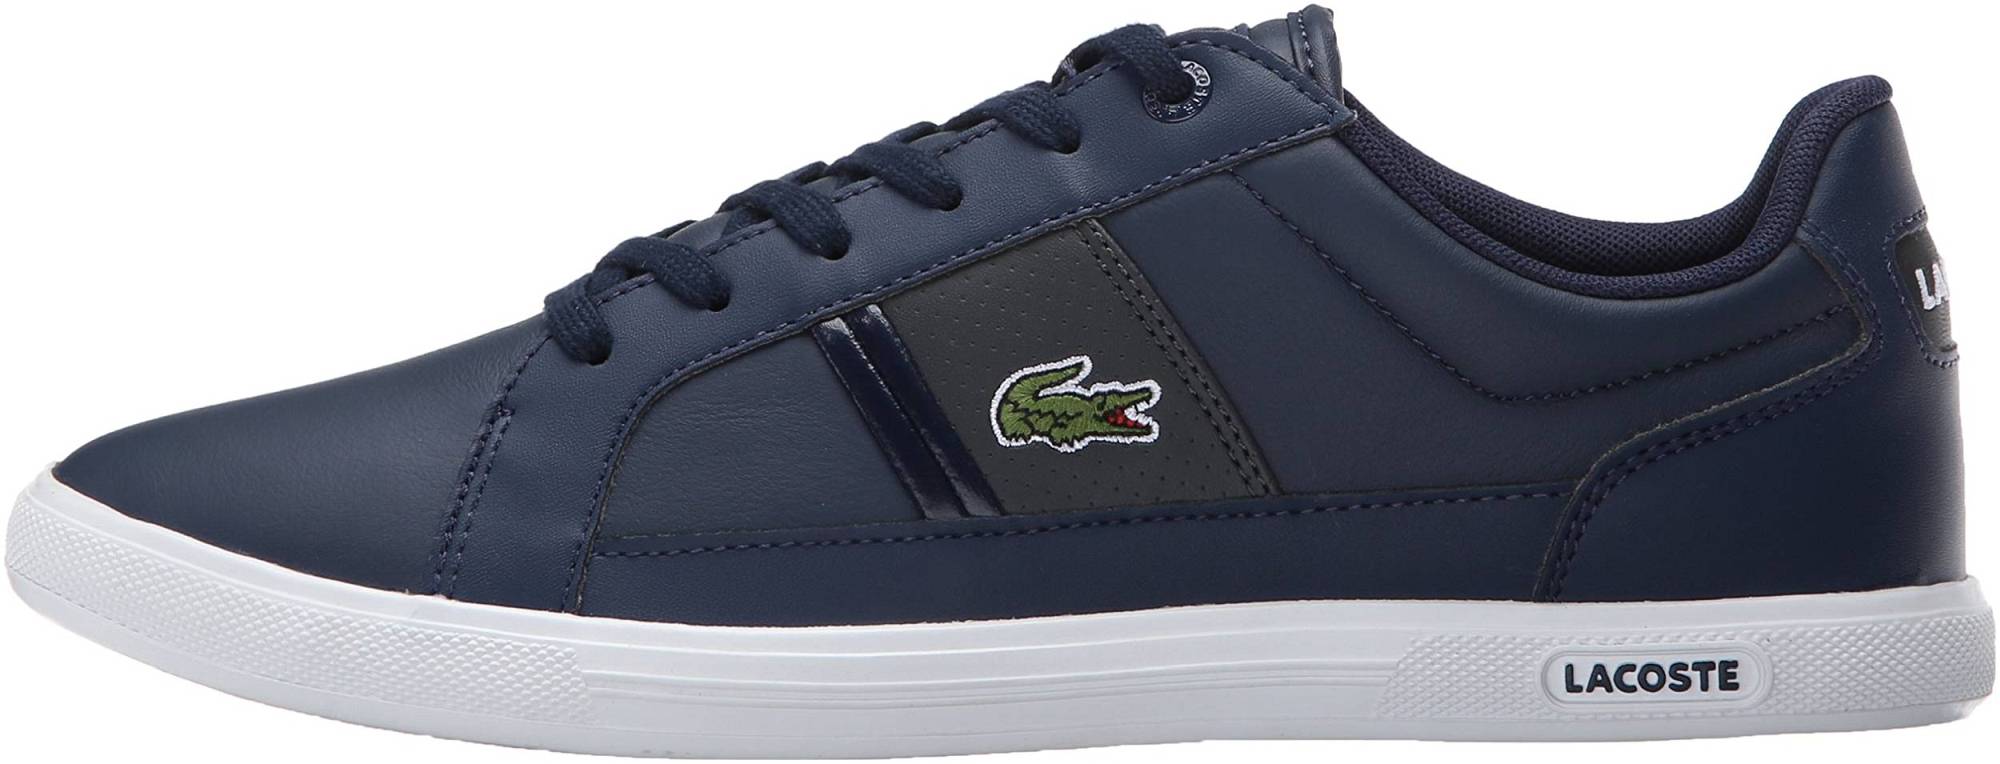 Lacoste Europa – Shoes Reviews & Reasons To Buy